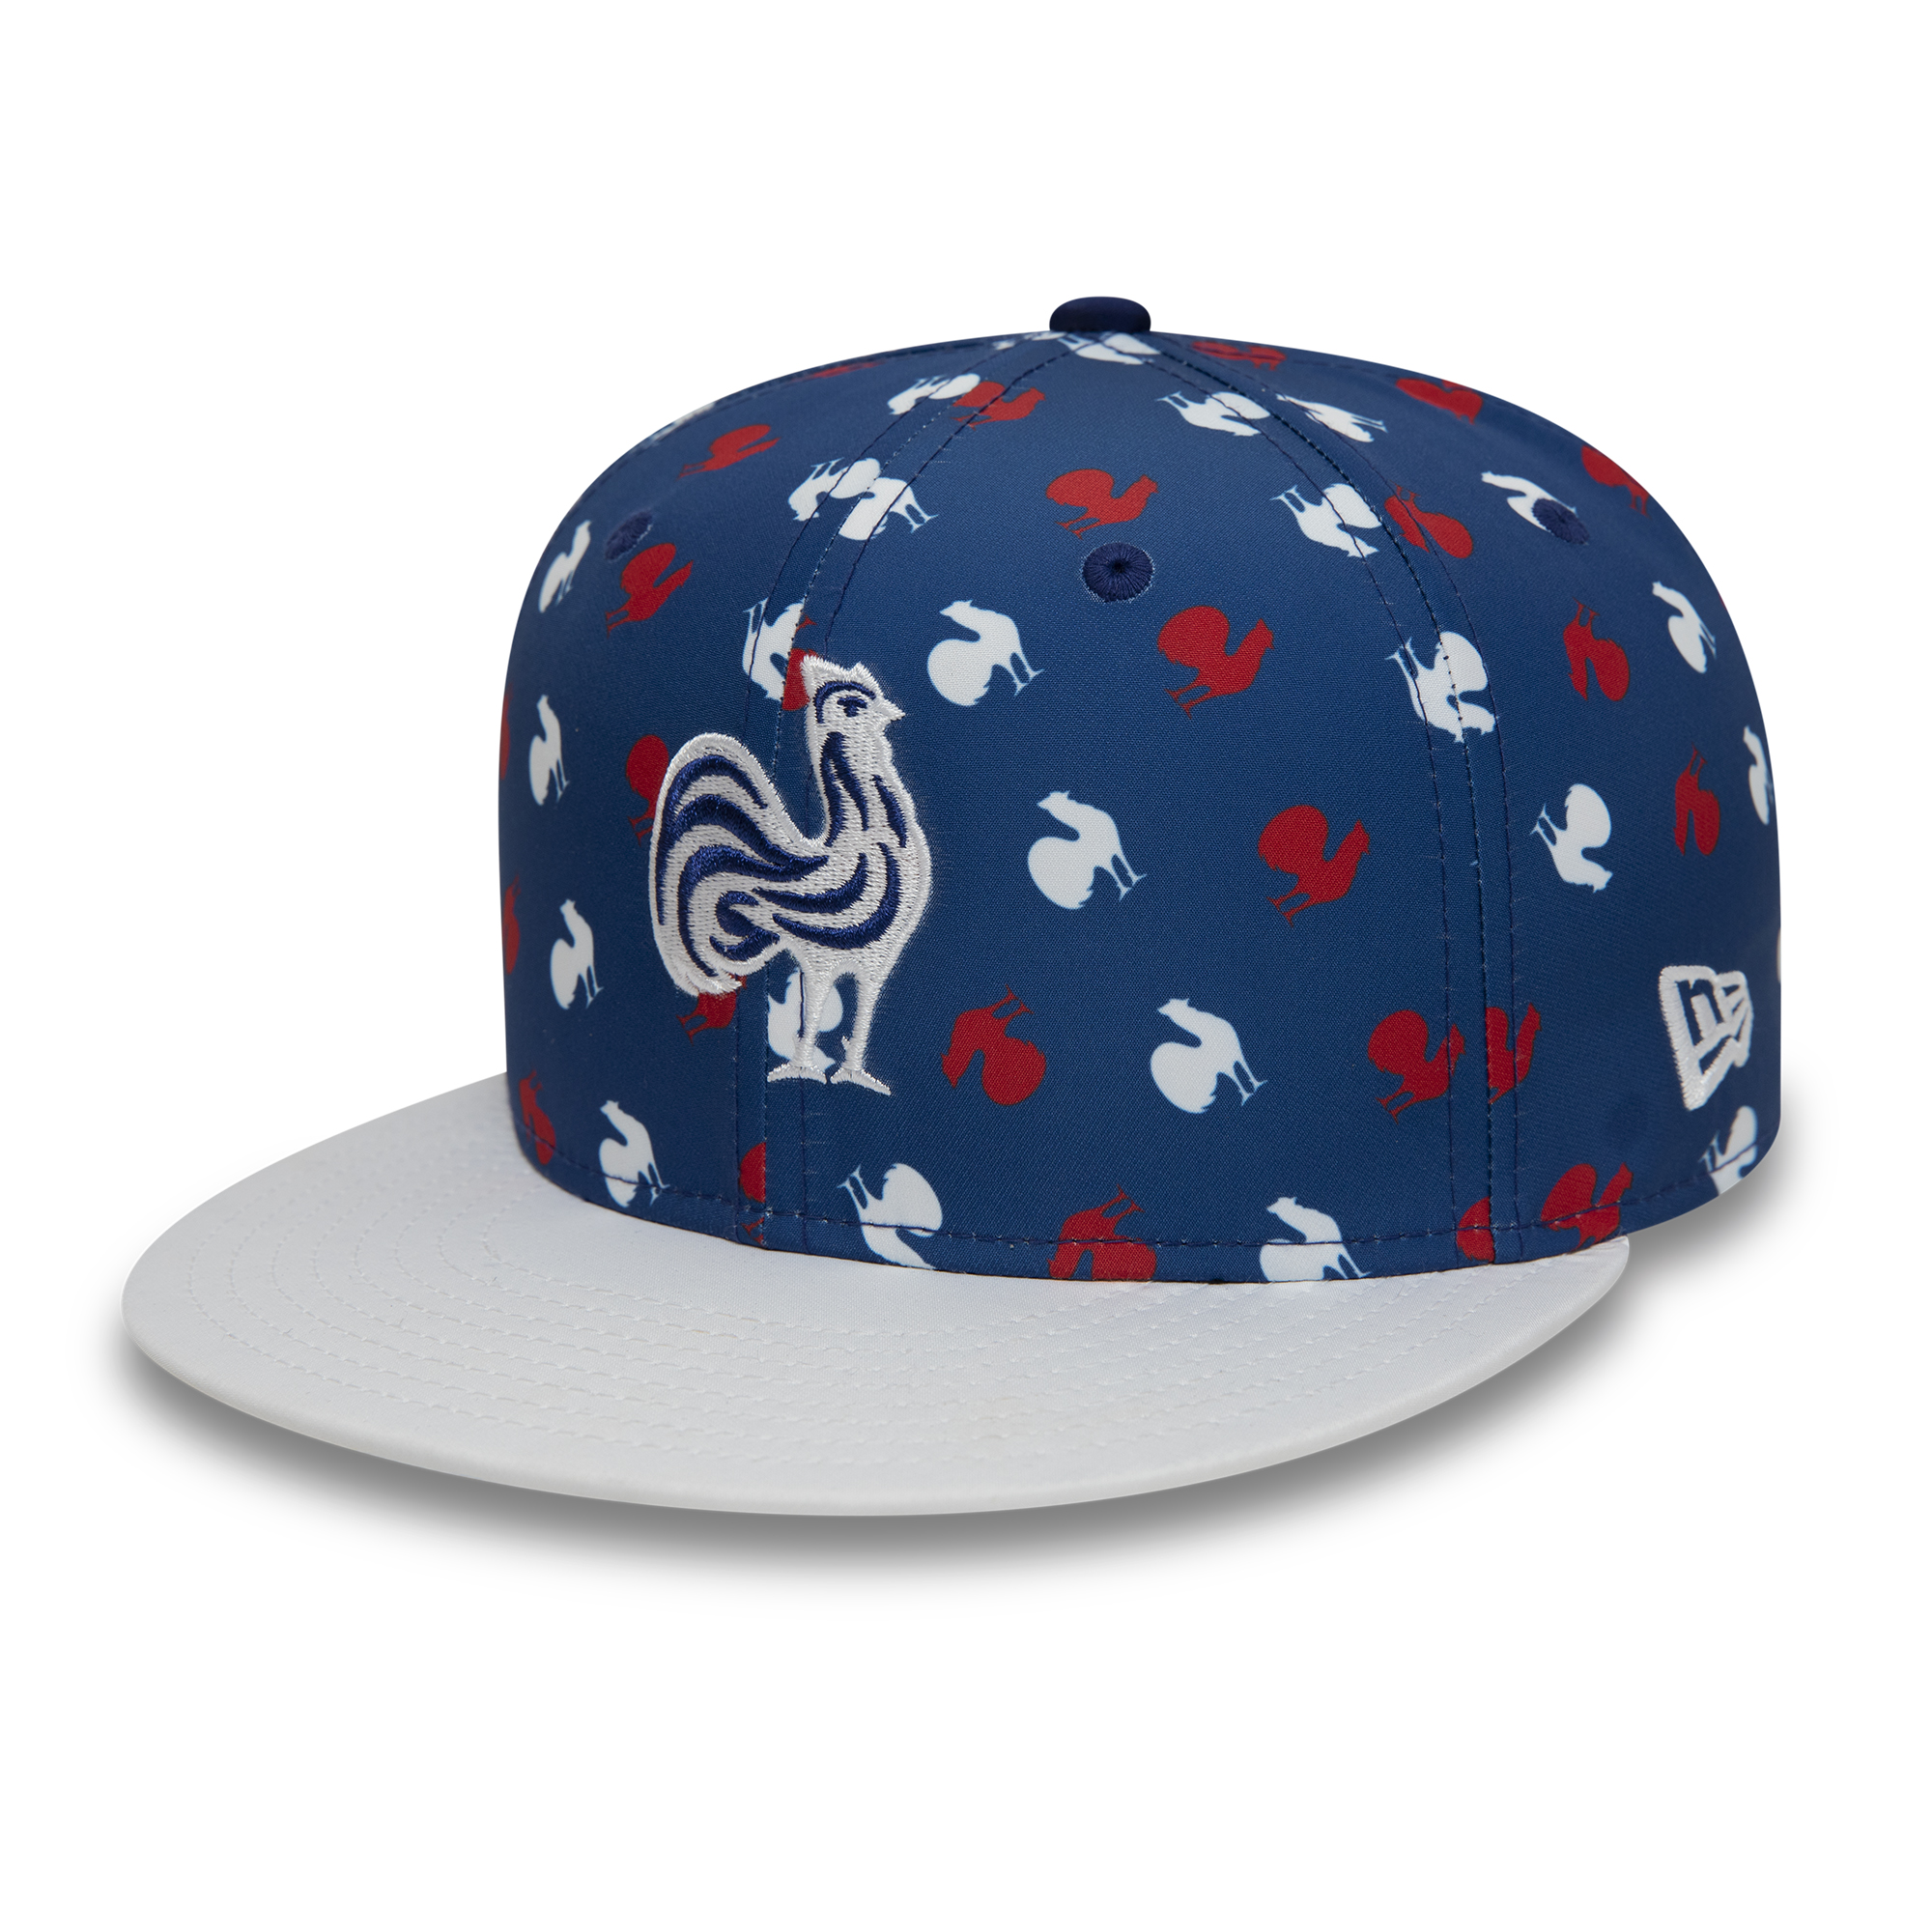 France Rugby Print Blue 9FIFTY Snapback Cap